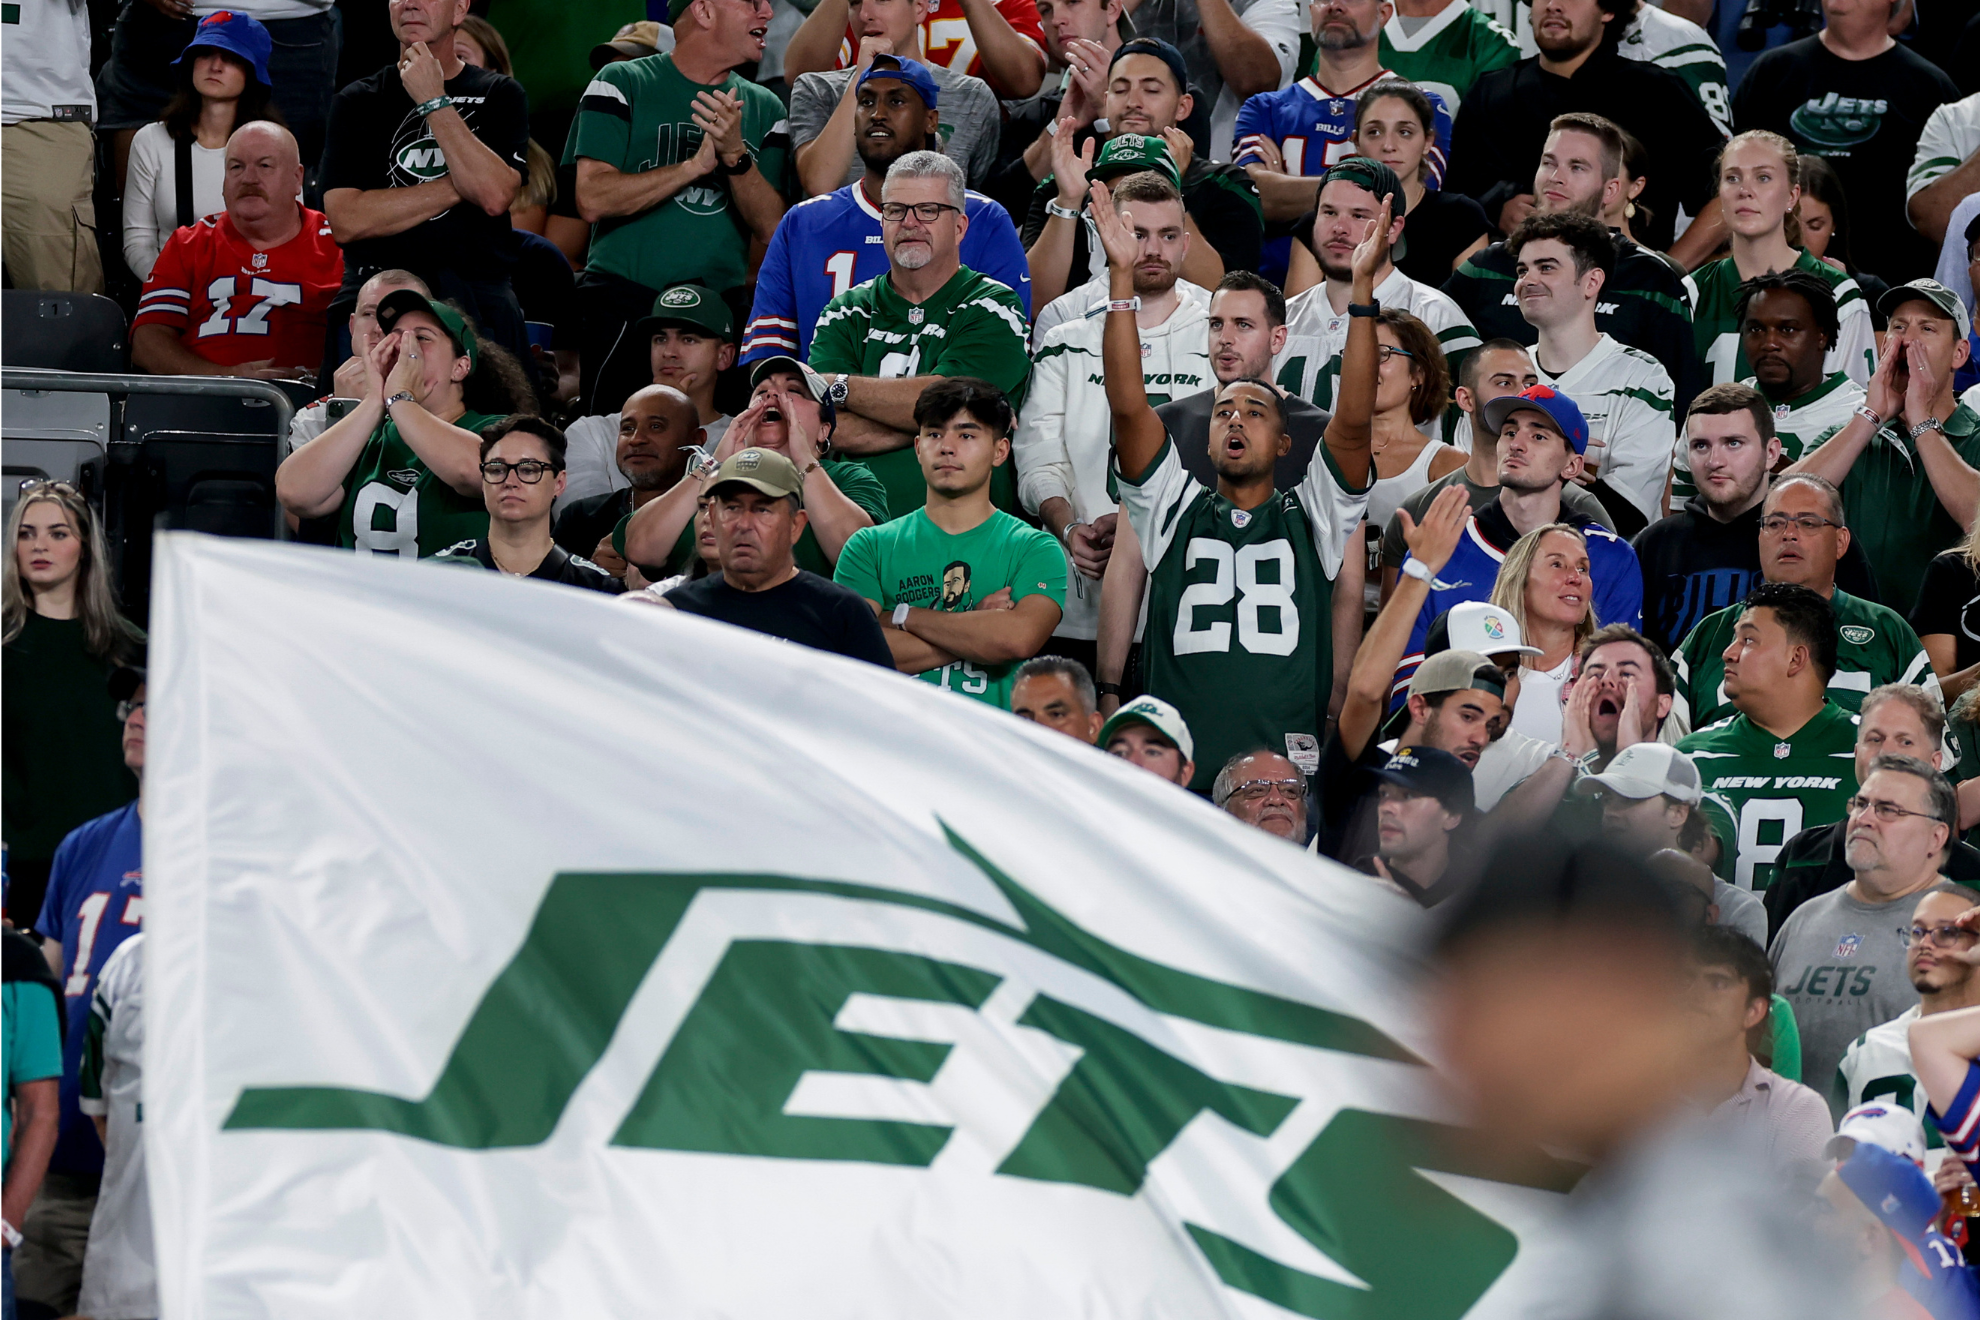 New York Jets fans haven't experienced much success.